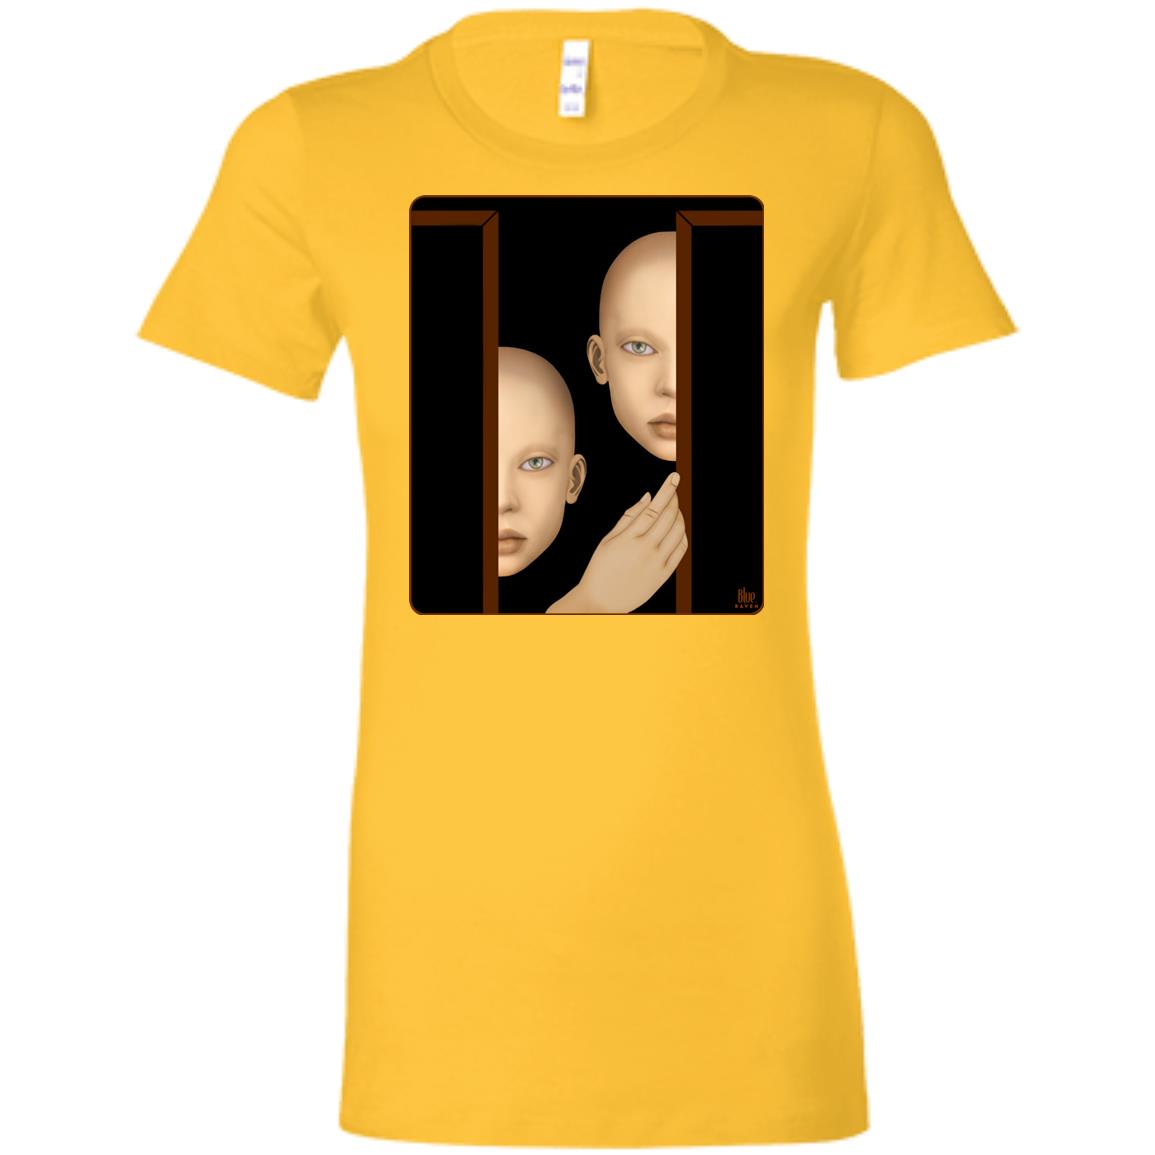 THE WATCHERS - Women's Fitted T-Shirt